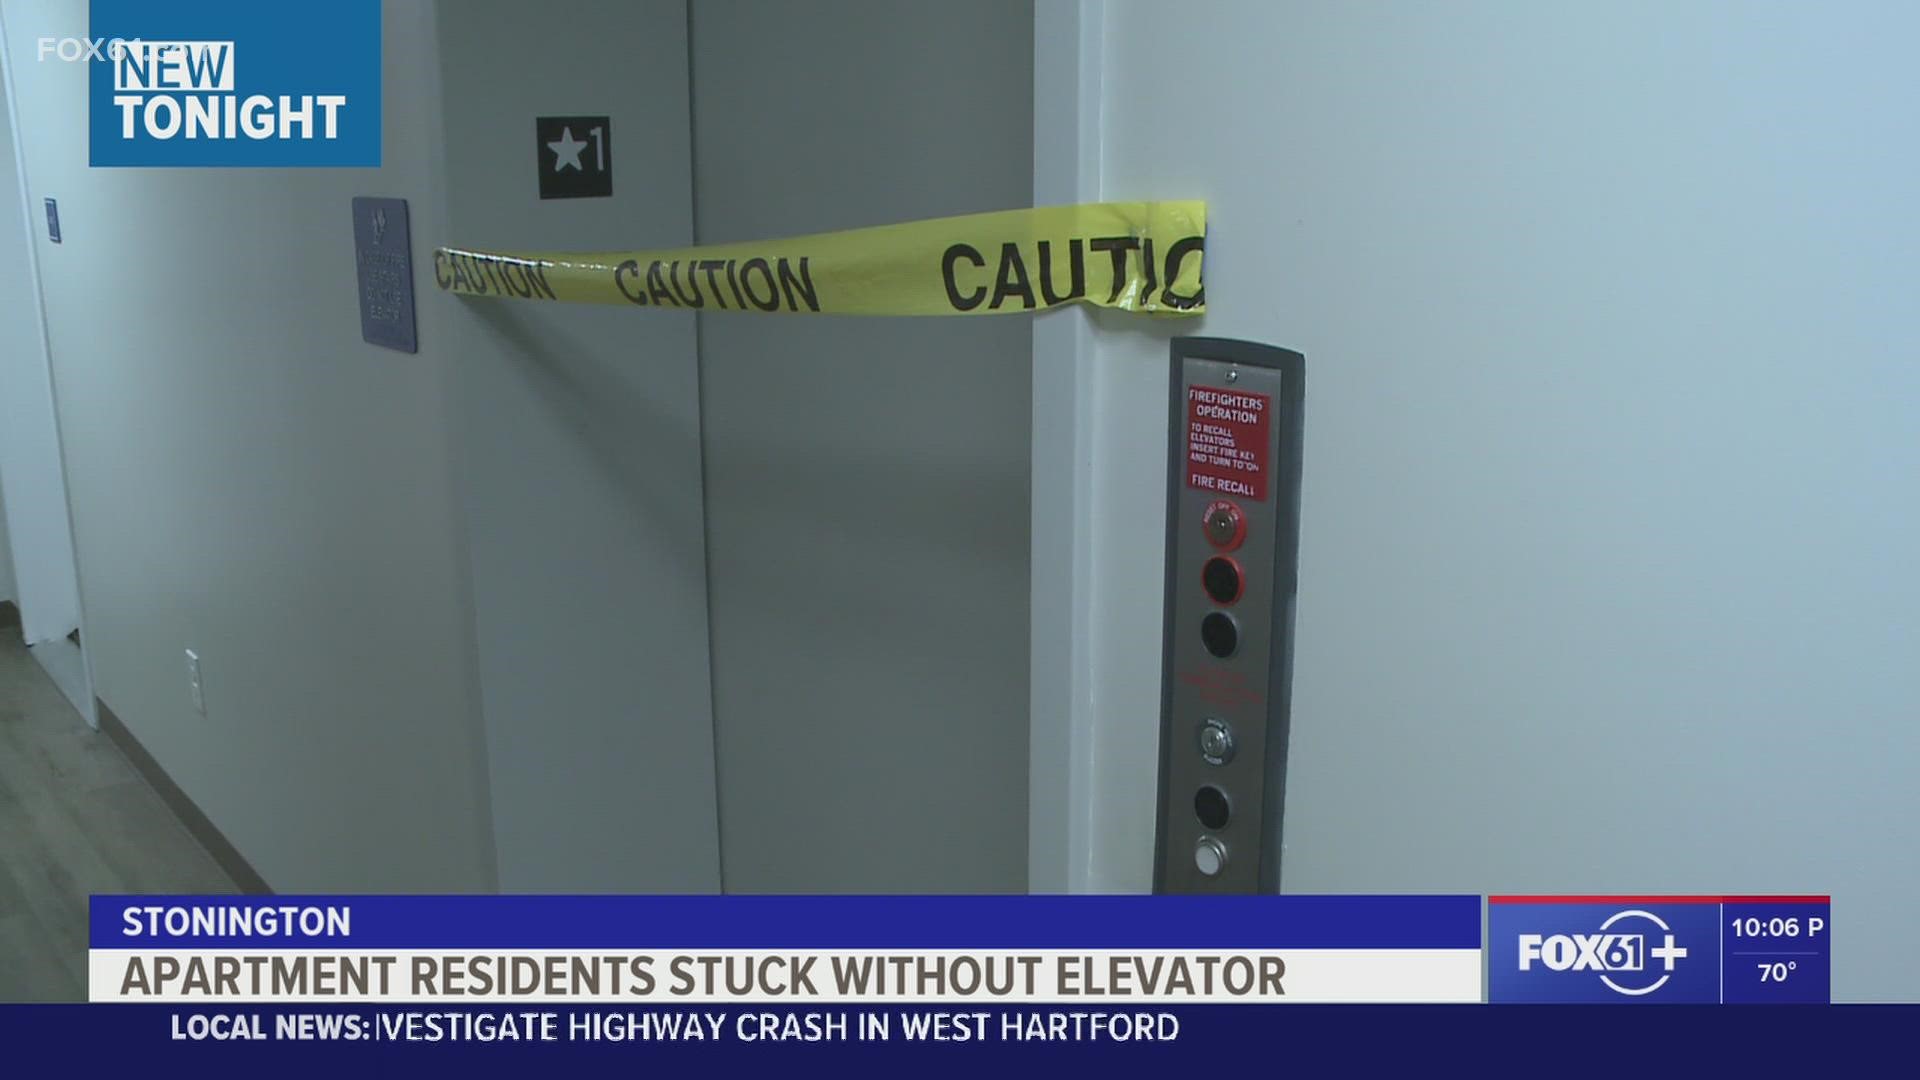 Residents at the Spruce Meadows Apartments in Stonington said the only elevator for the three-story building has been out of service since last week.